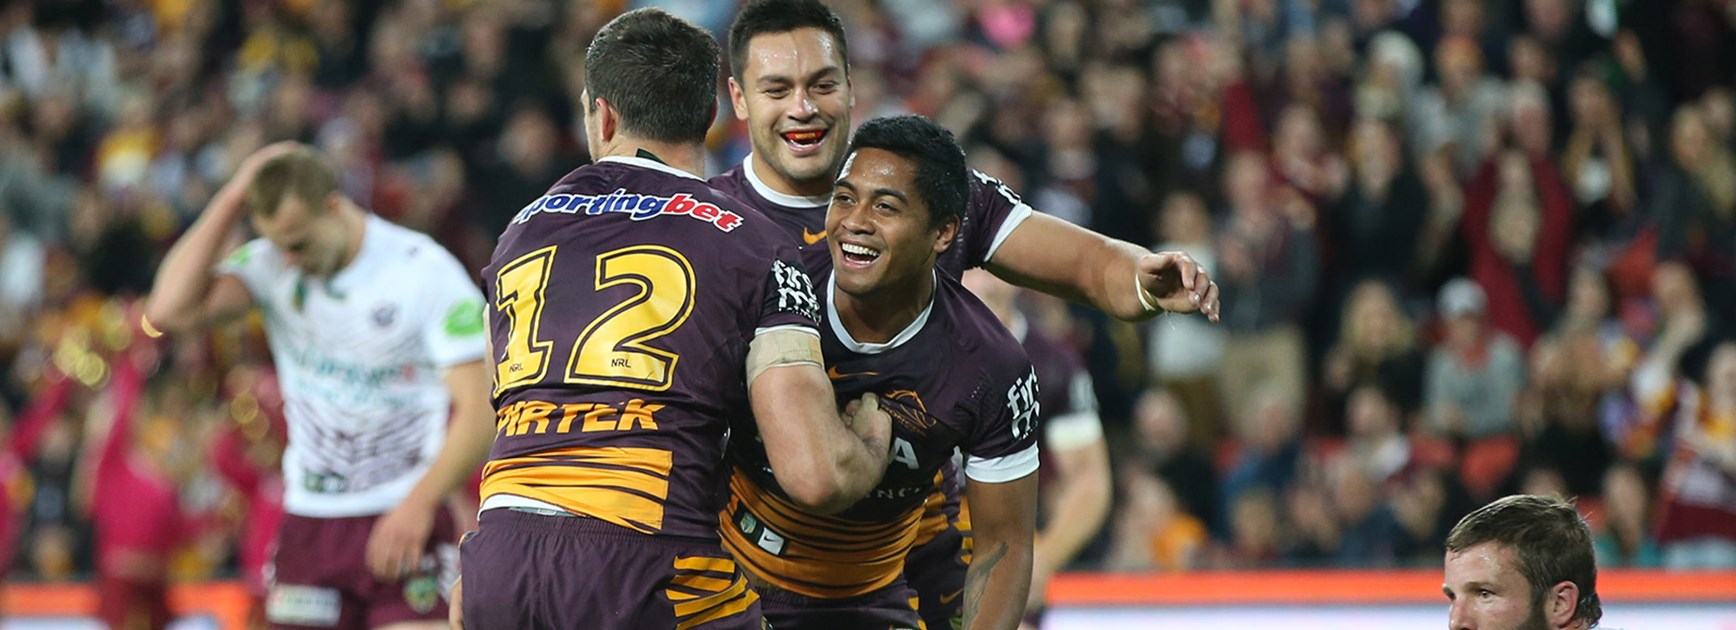 Brisbane celebrates Anthony Milford's try against Manly at Suncorp Stadium in Round 13.